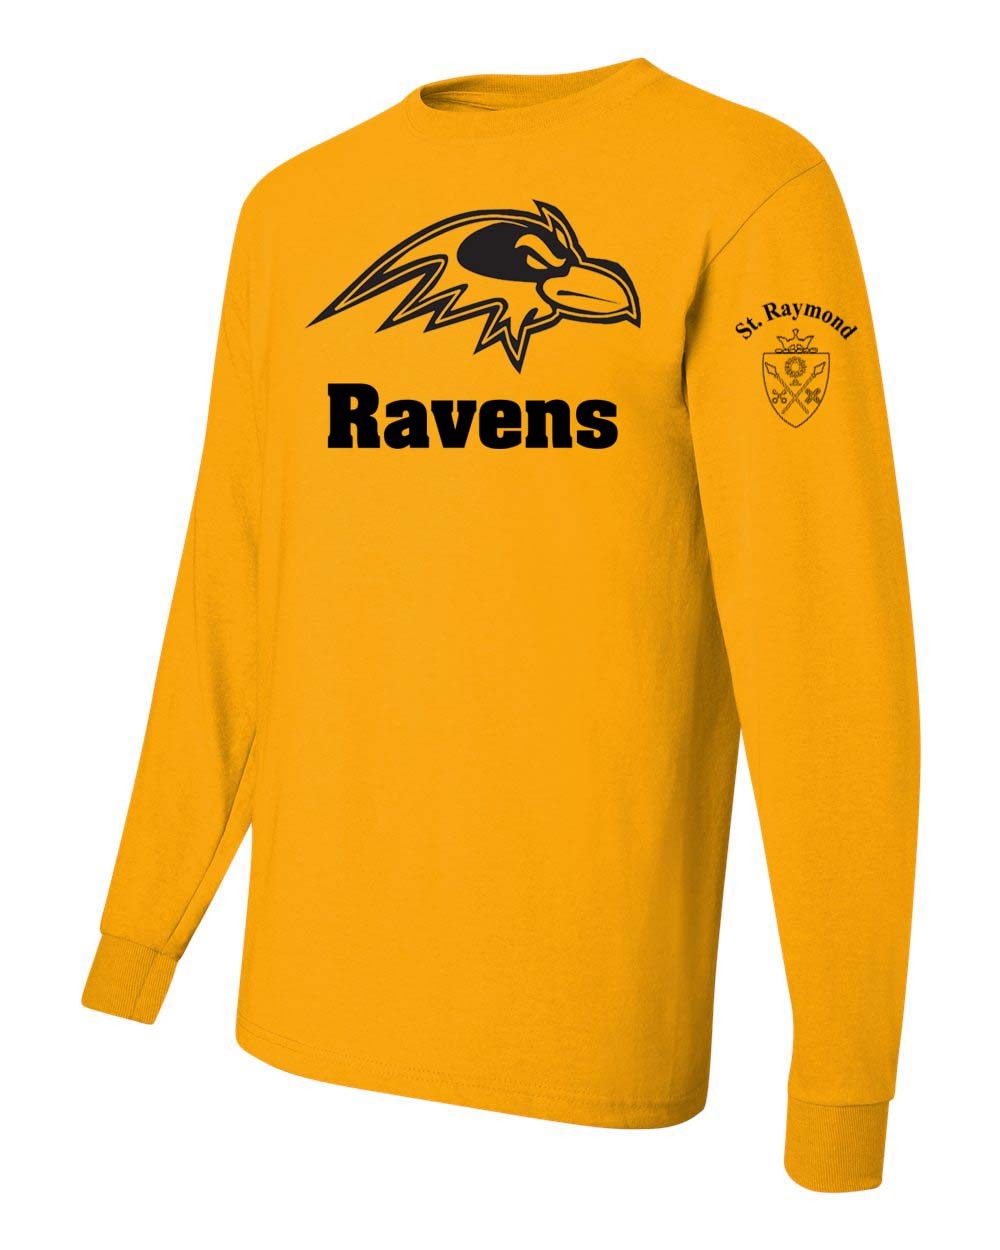 STAFF SRS L/S T-Shirt w/ Raven Logo - Please Allow 2-3 Weeks for Delivery